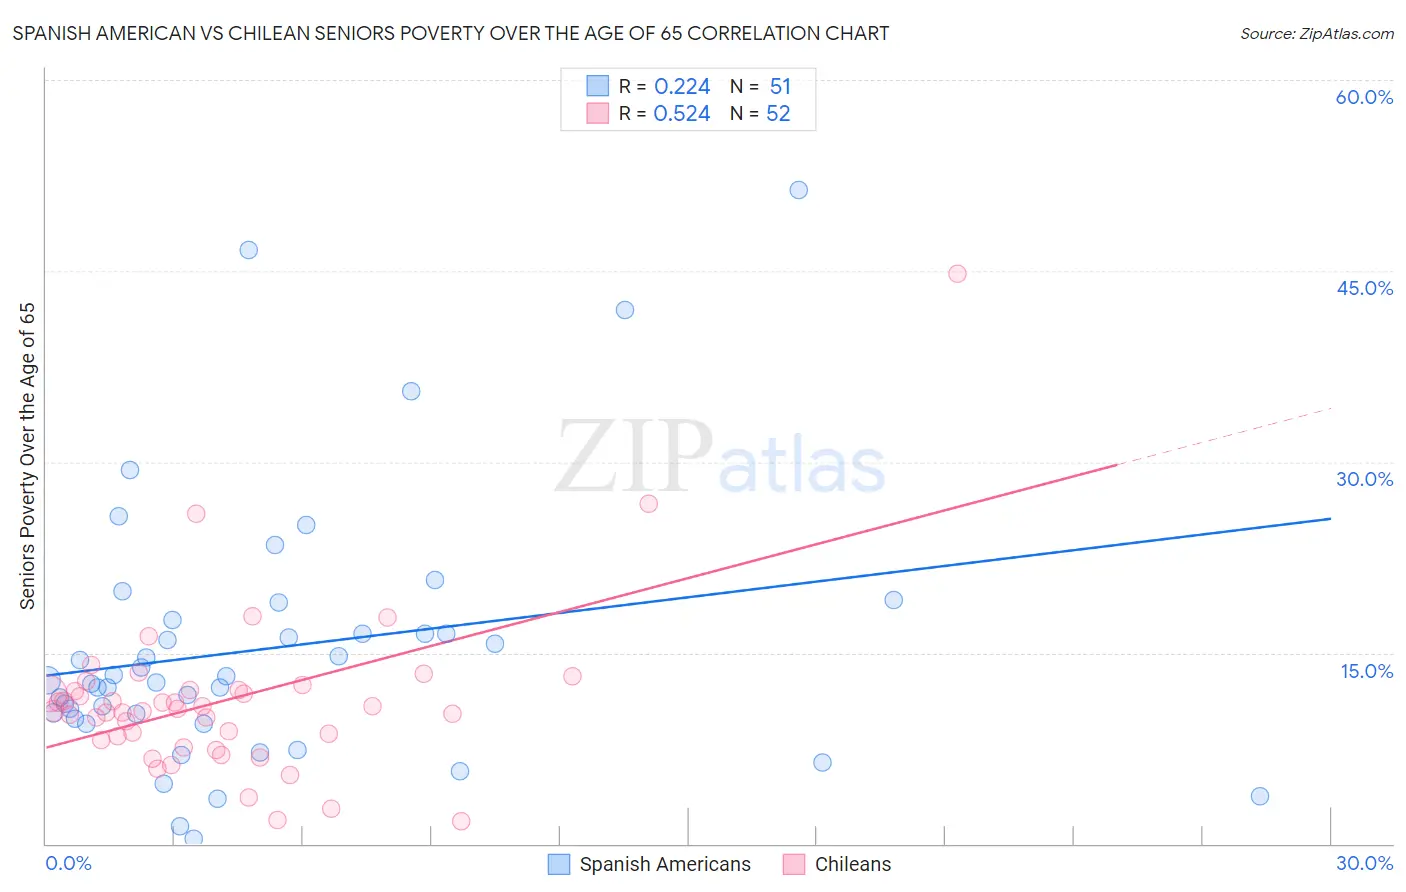 Spanish American vs Chilean Seniors Poverty Over the Age of 65